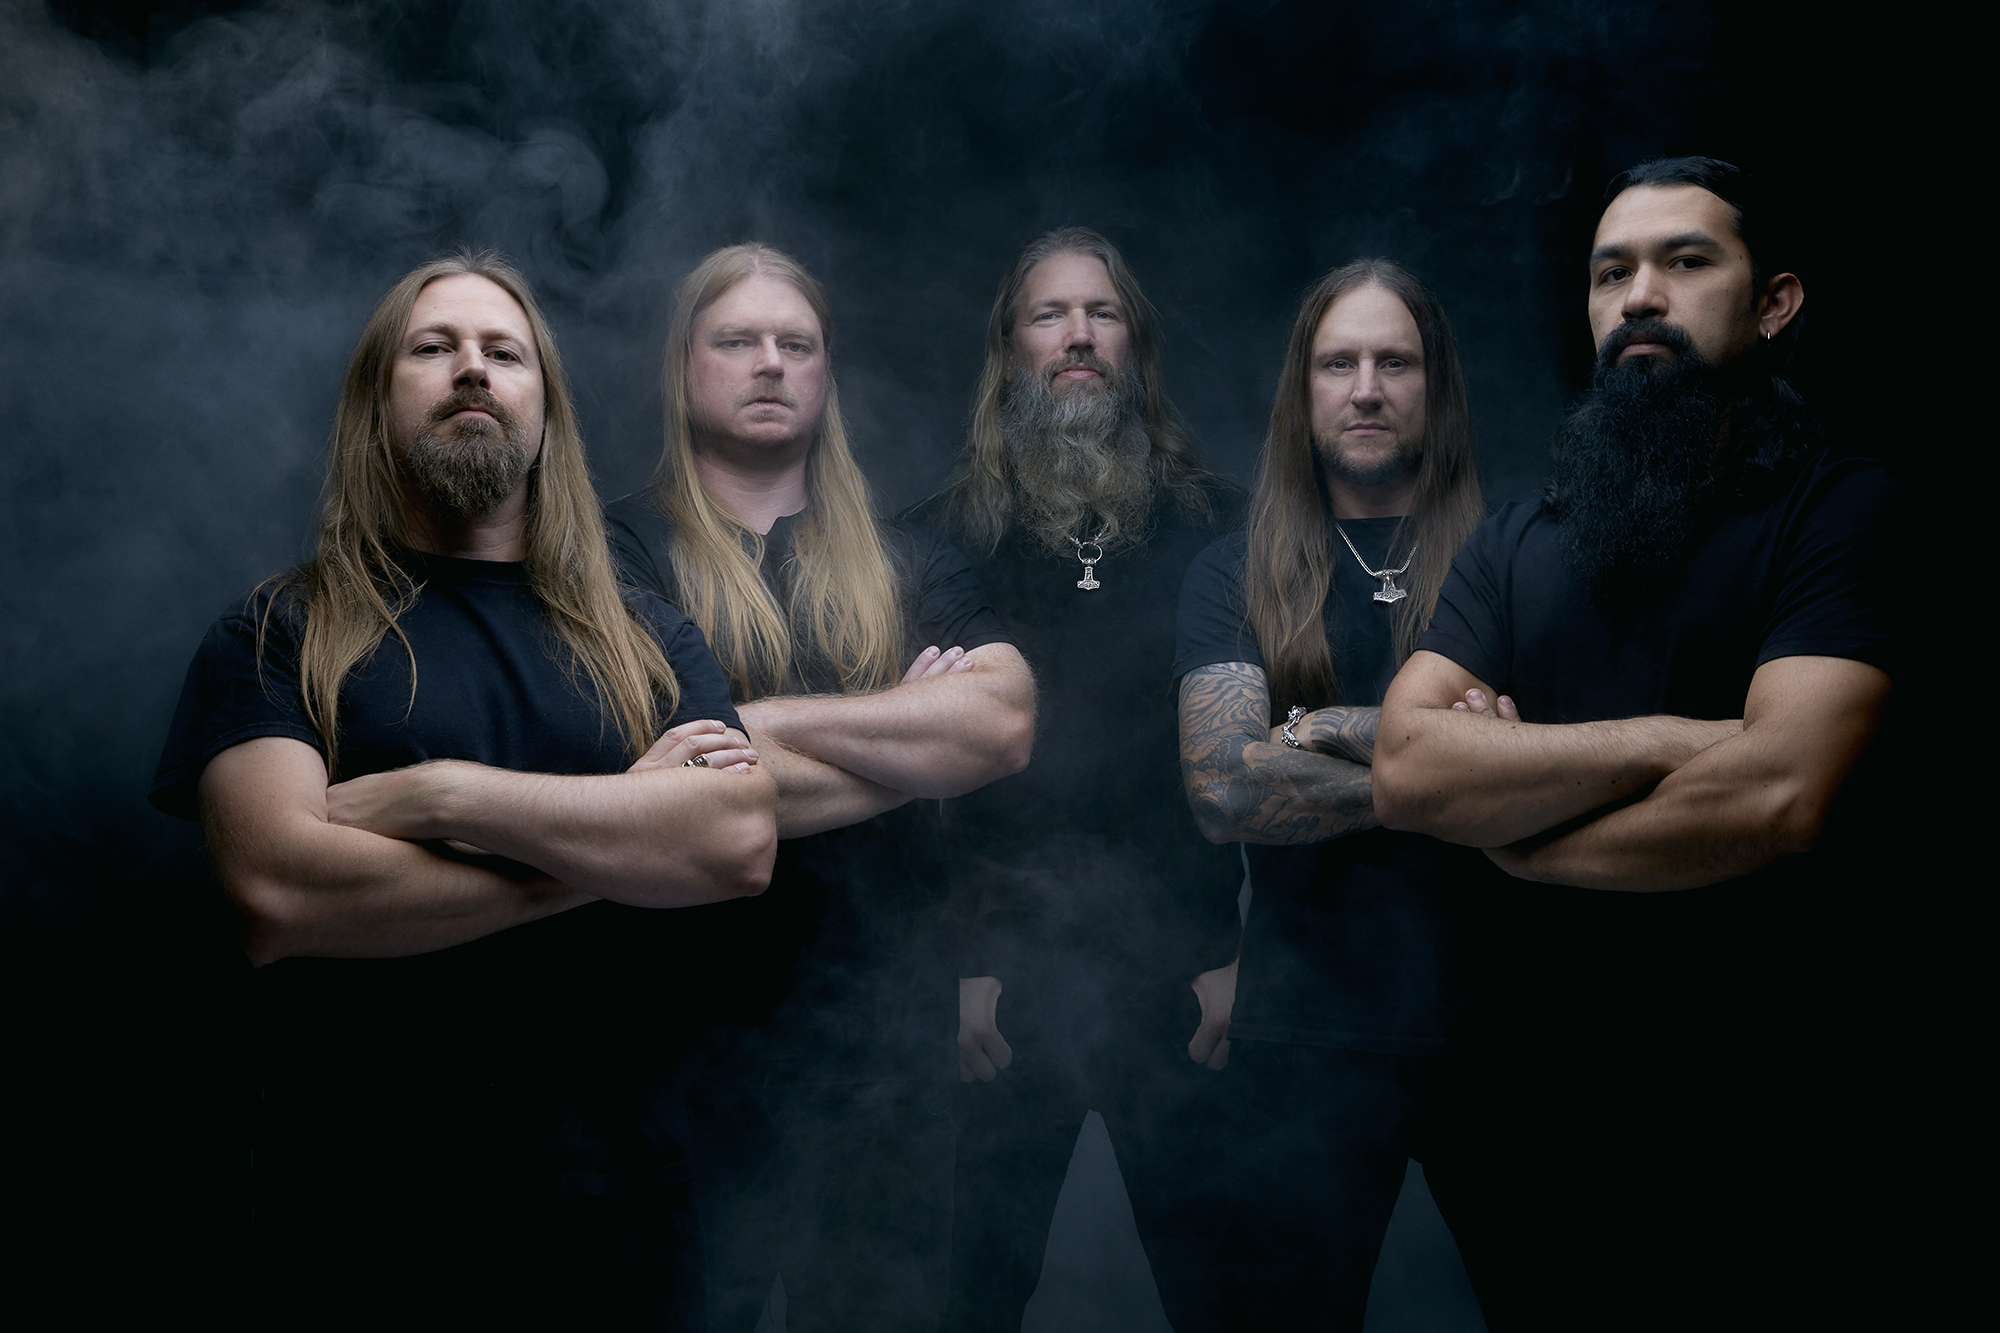 amon-amarth-how-to-become-a-viking-album-prelistening-news